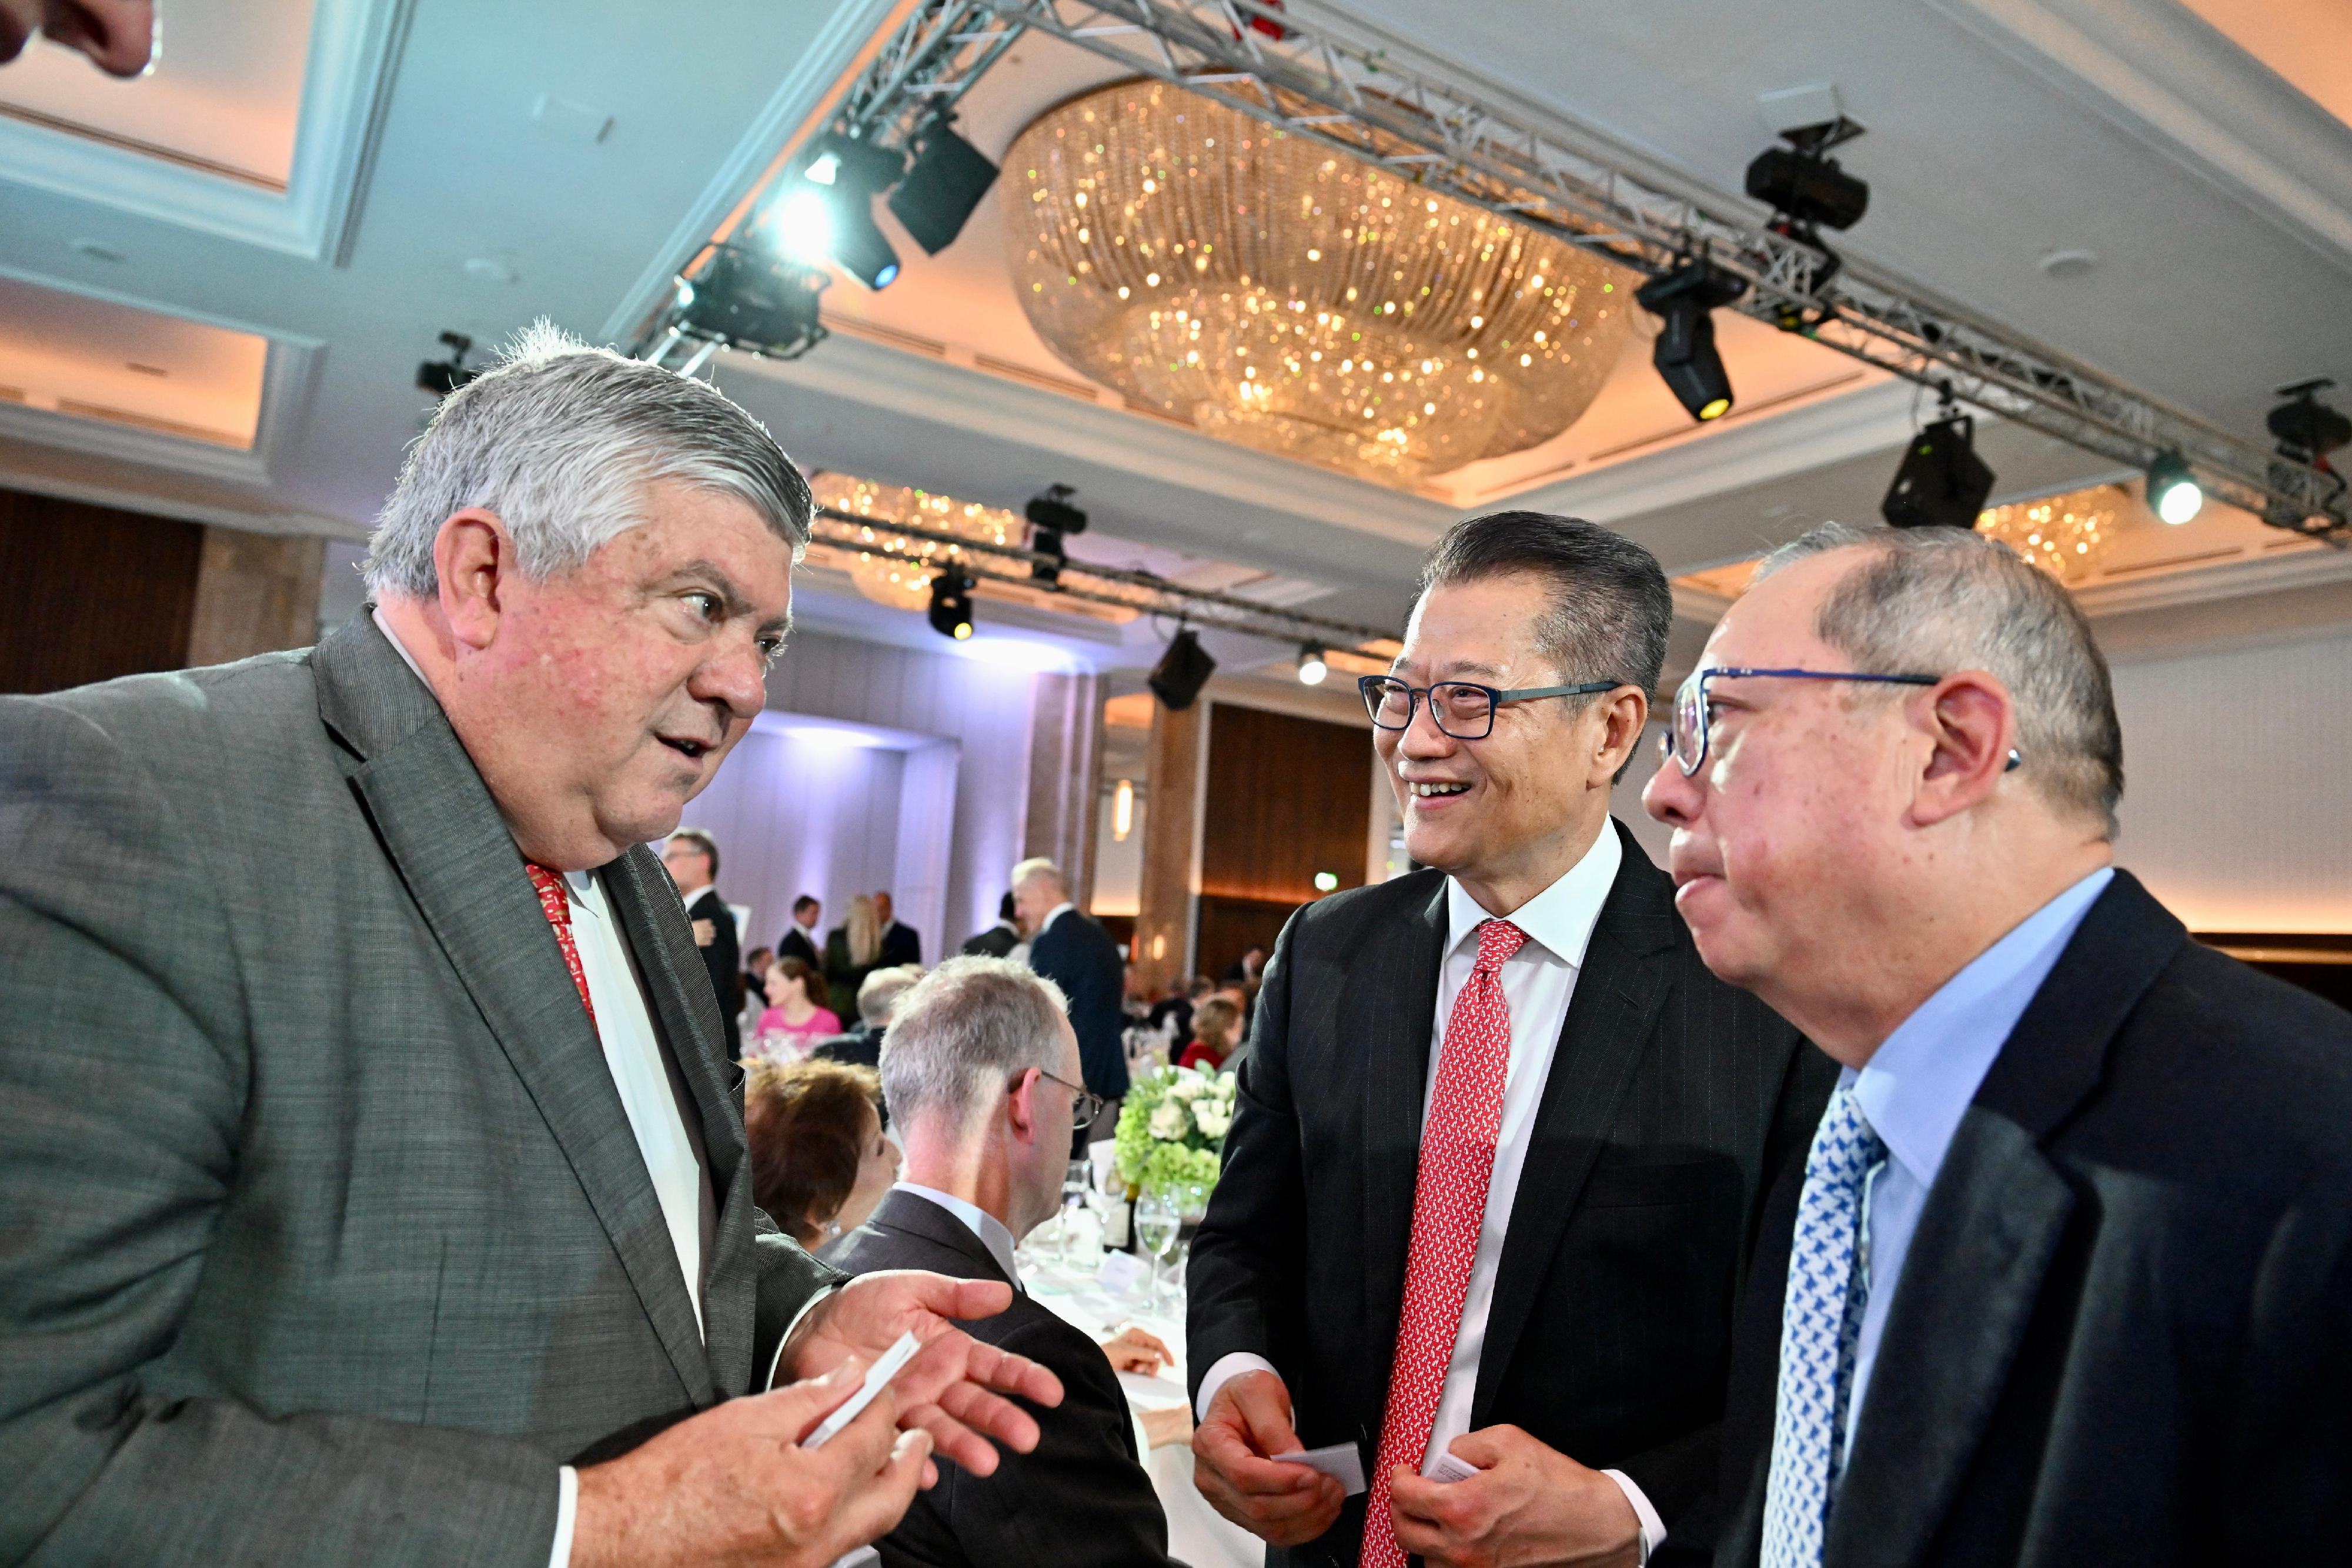 The Financial Secretary, Mr Paul Chan, arrived in London yesterday (September 20, London time) to begin his visit to London, and attended the Hong Kong Dinner organised by the Hong Kong Trade Development Council. Photo shows Mr Chan (second right) and Chairman of the Hong Kong Trade Development Council, Dr Peter Lam (first right) exchanging with guests attending the dinner.